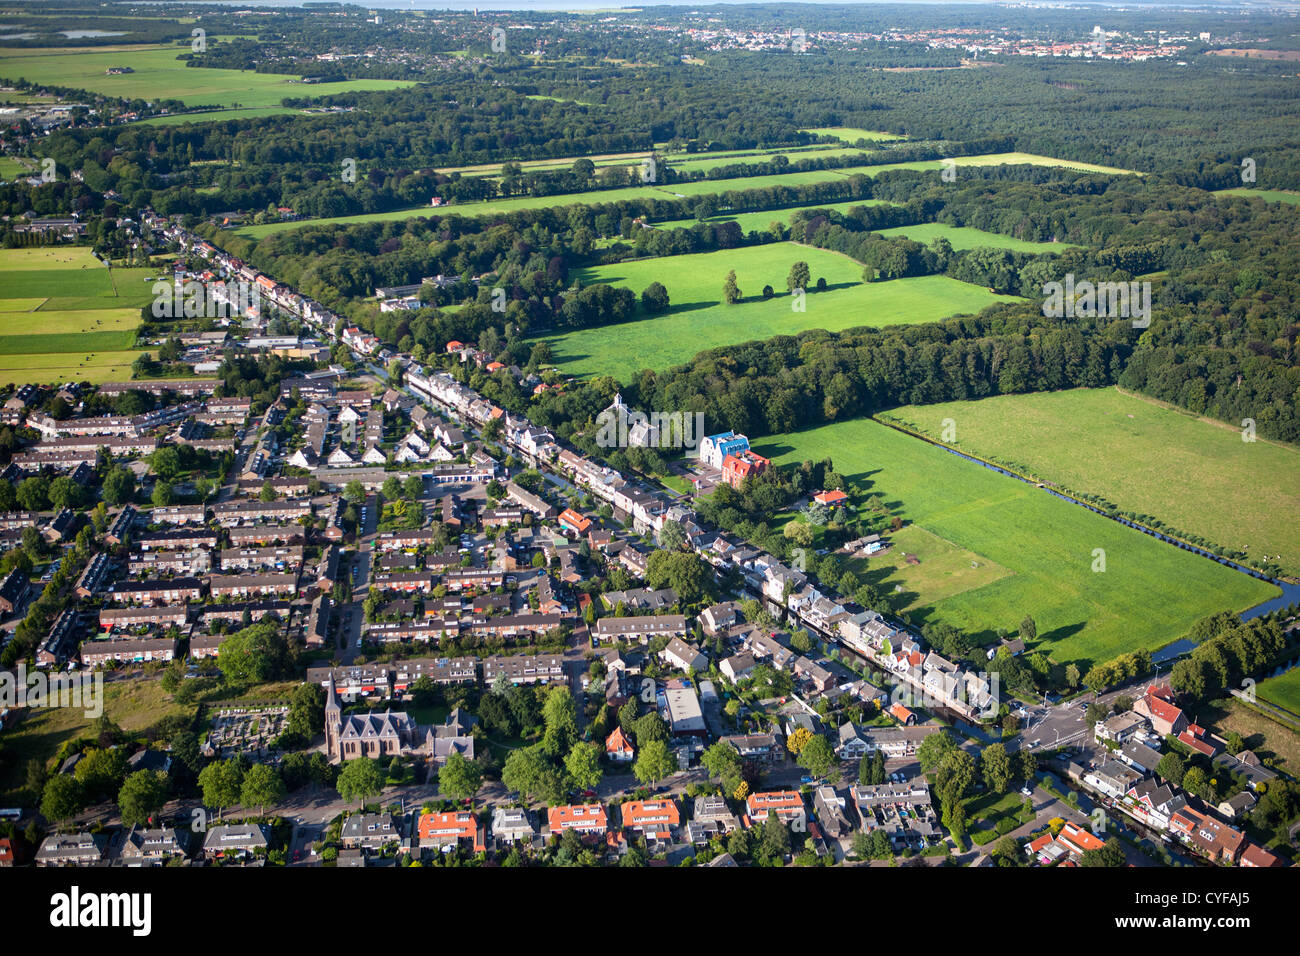 Foreground view on village called Kortenhoef, background the northern part of  the rural estate areas of 'S-Graveland. Aerial. Stock Photo